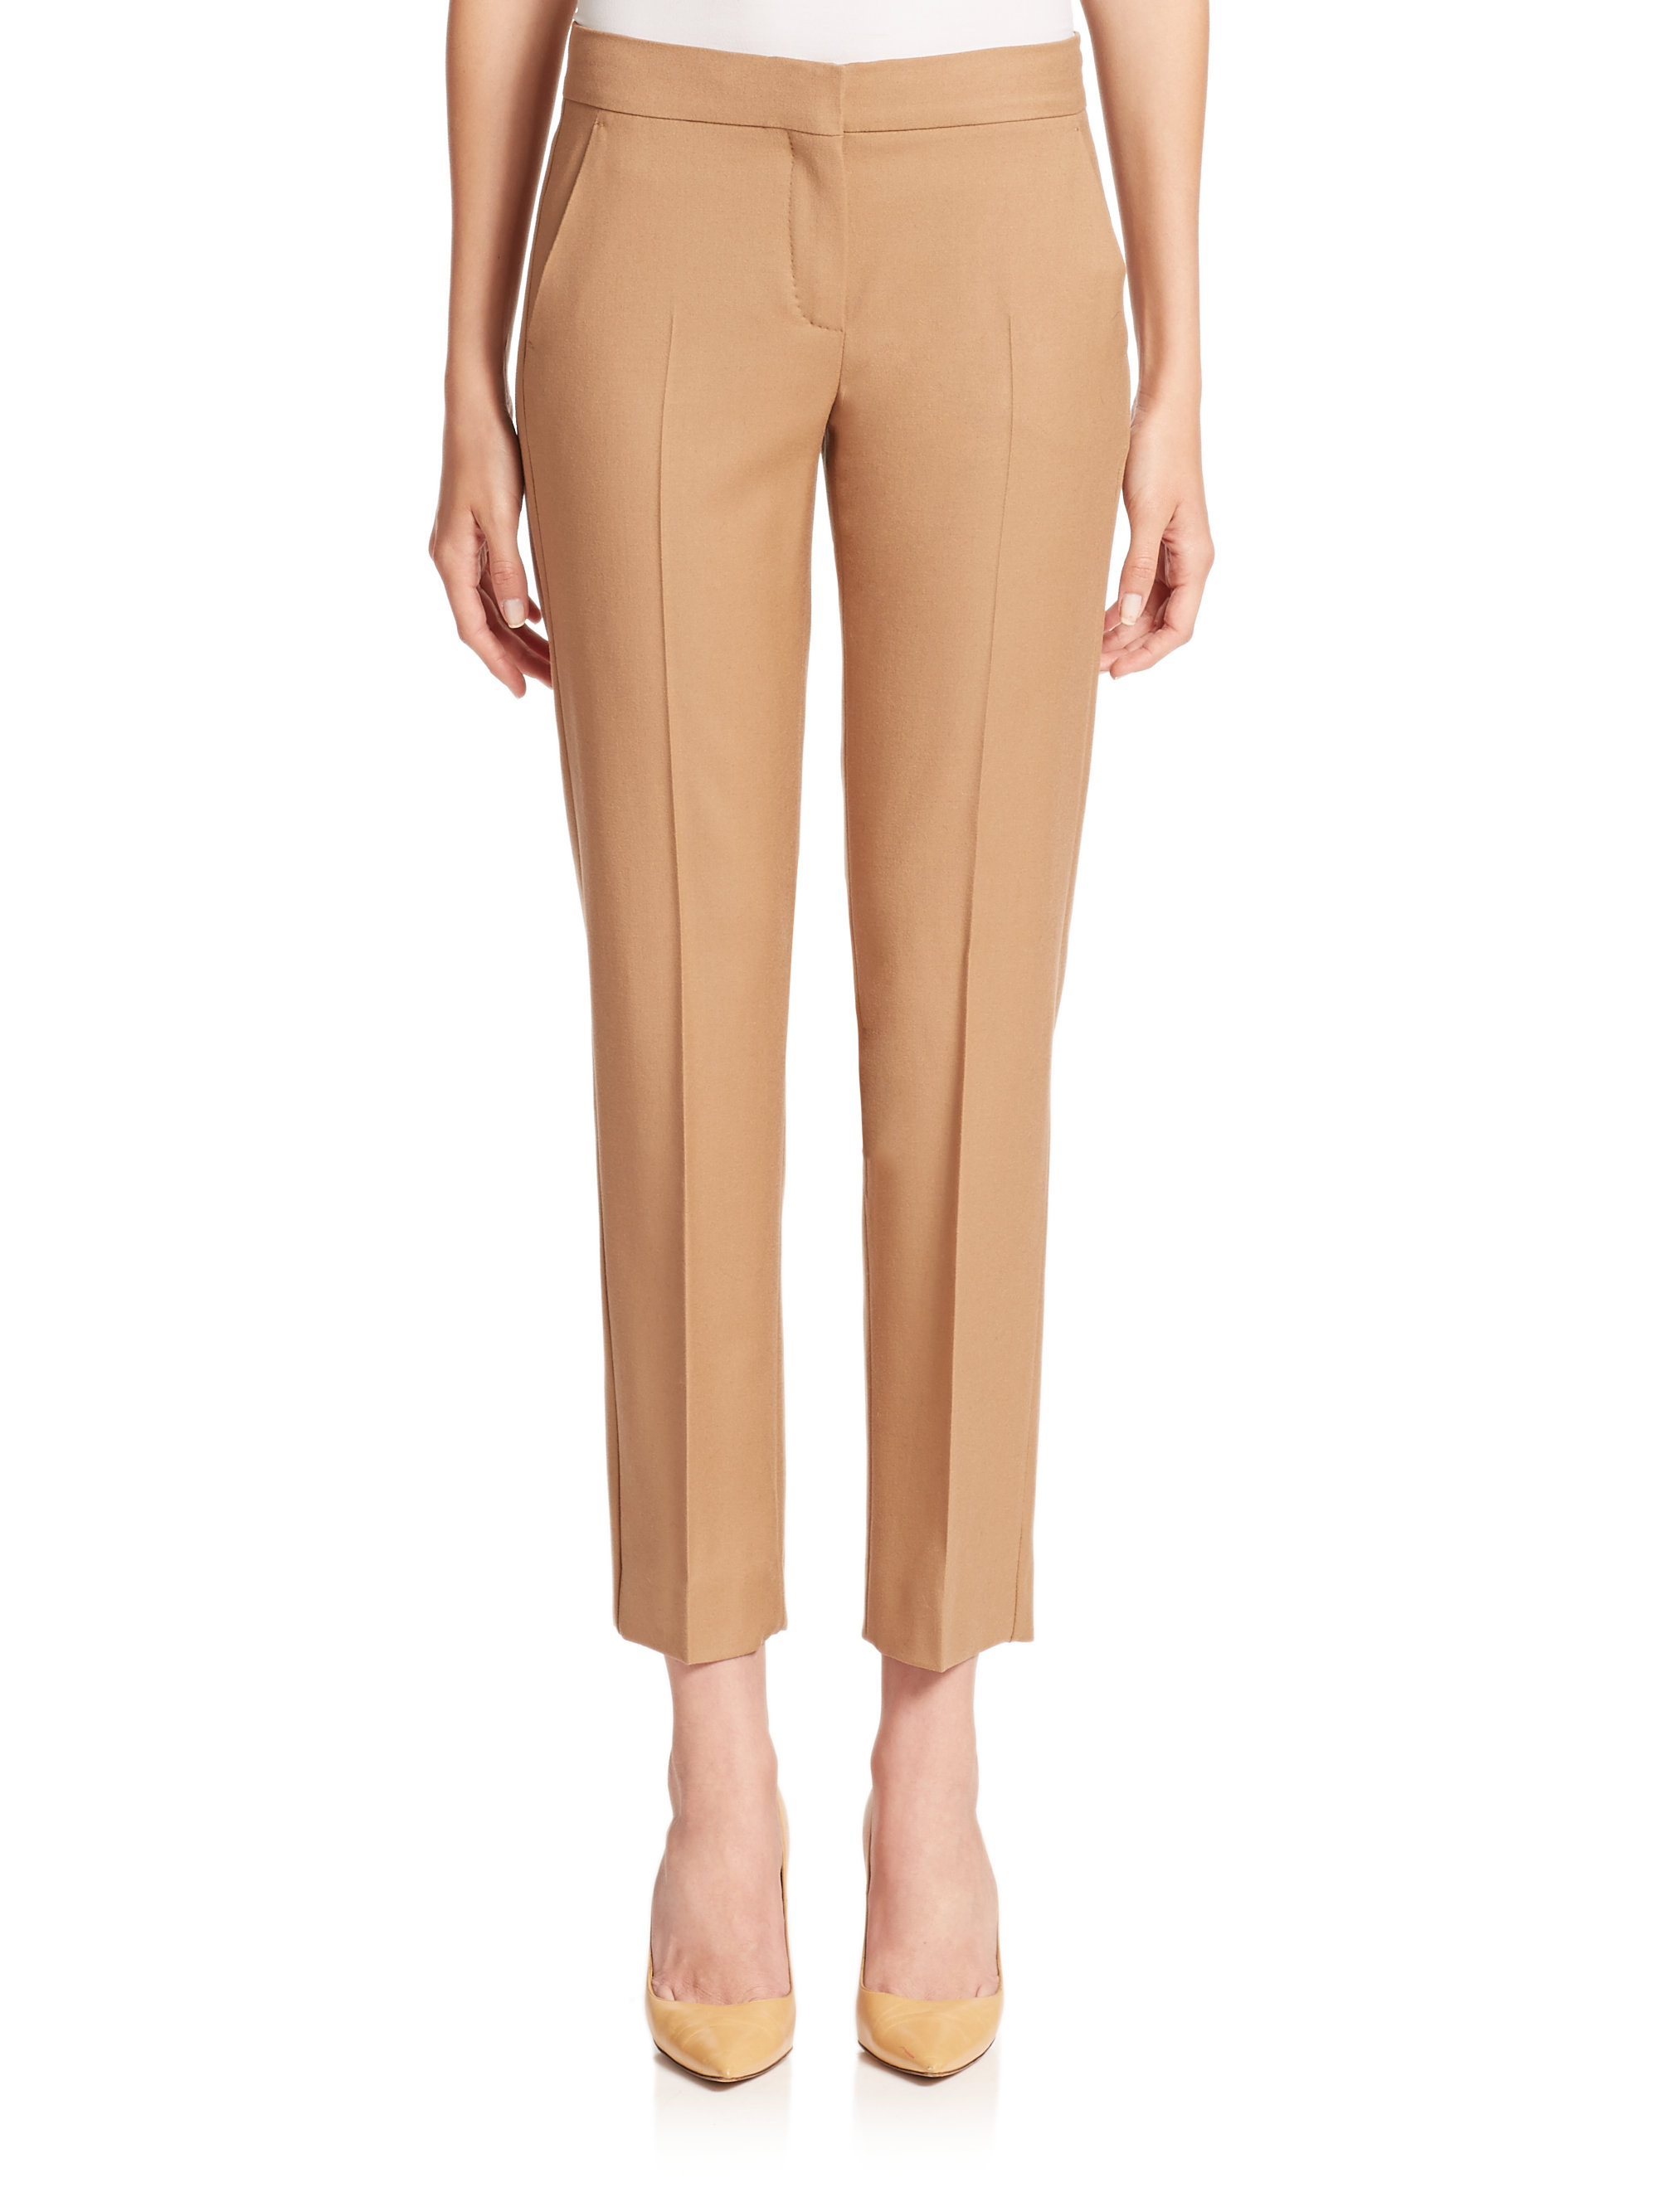 Lyst - Max Mara Aldeno Wool Ankle Pants in Natural